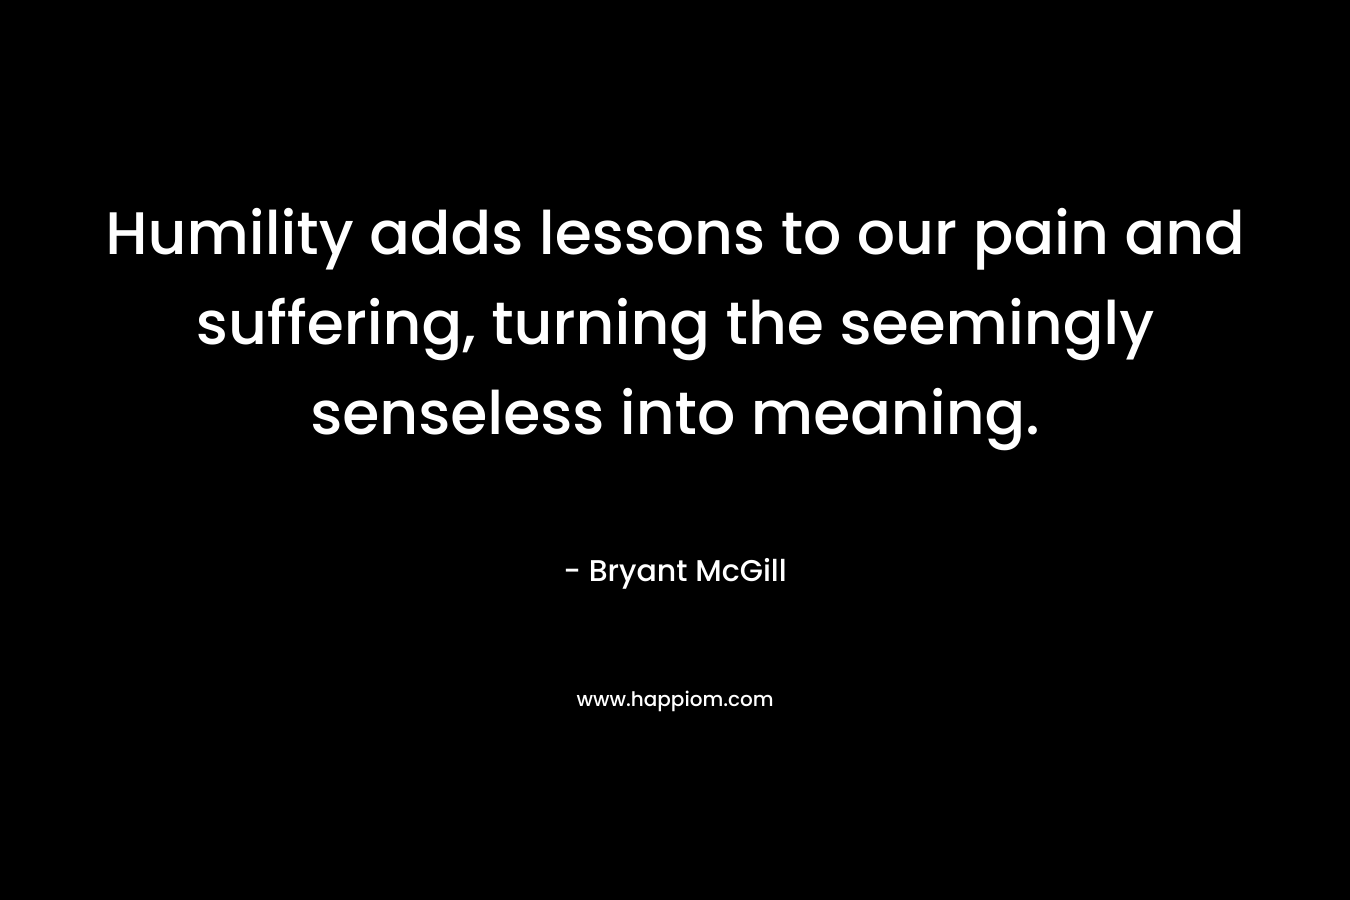 Humility adds lessons to our pain and suffering, turning the seemingly senseless into meaning. – Bryant McGill